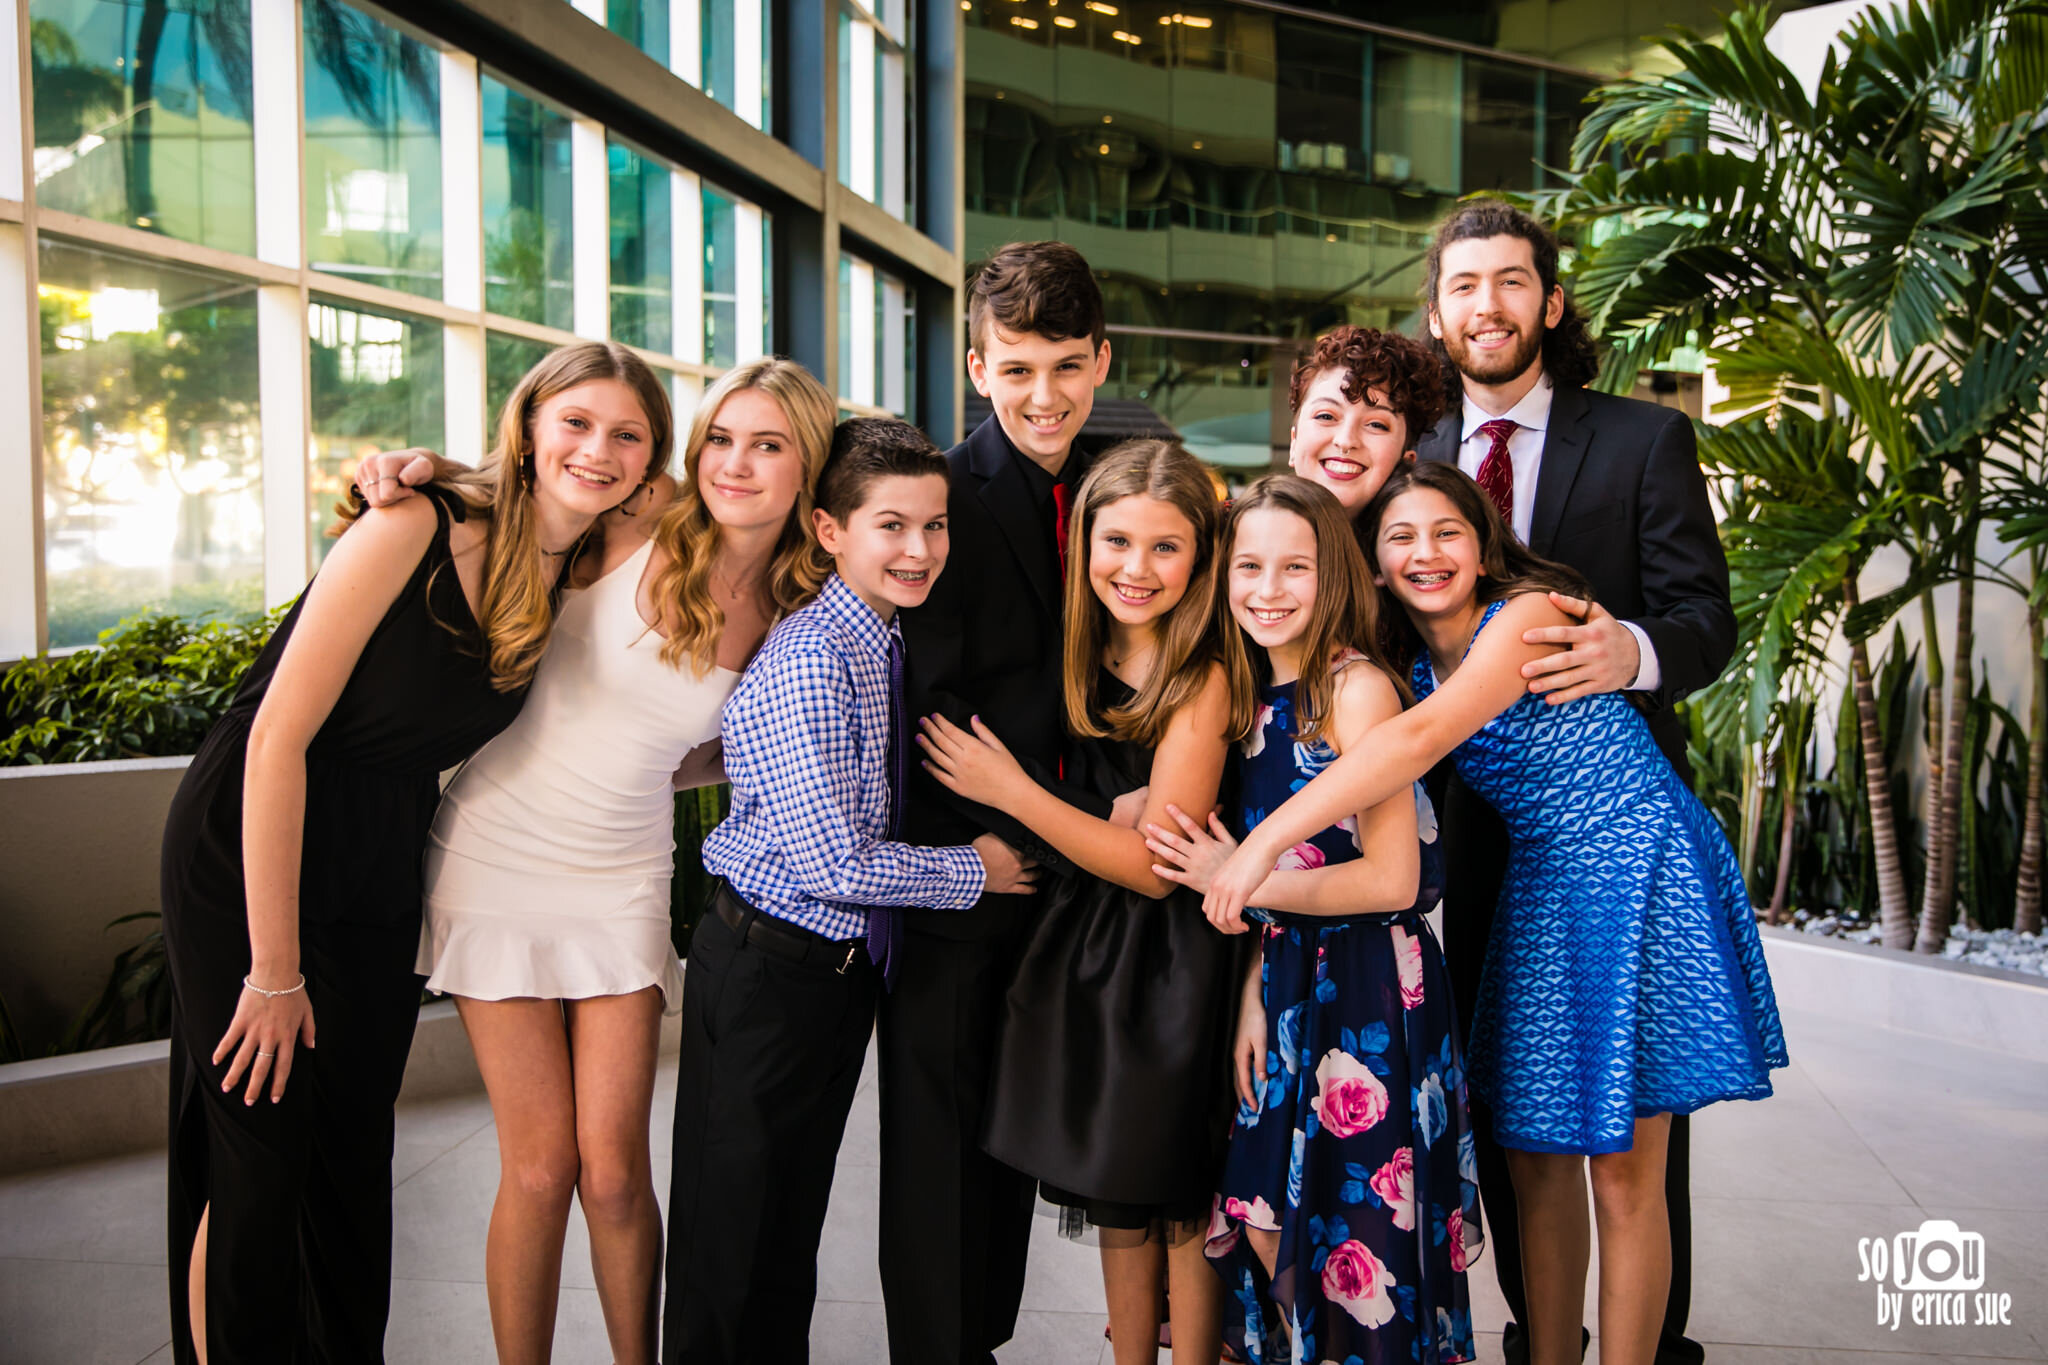 17-so-you-by-erica-sue-bar-mitzvah-photographer-boca-pavilion-grille-4664.JPG